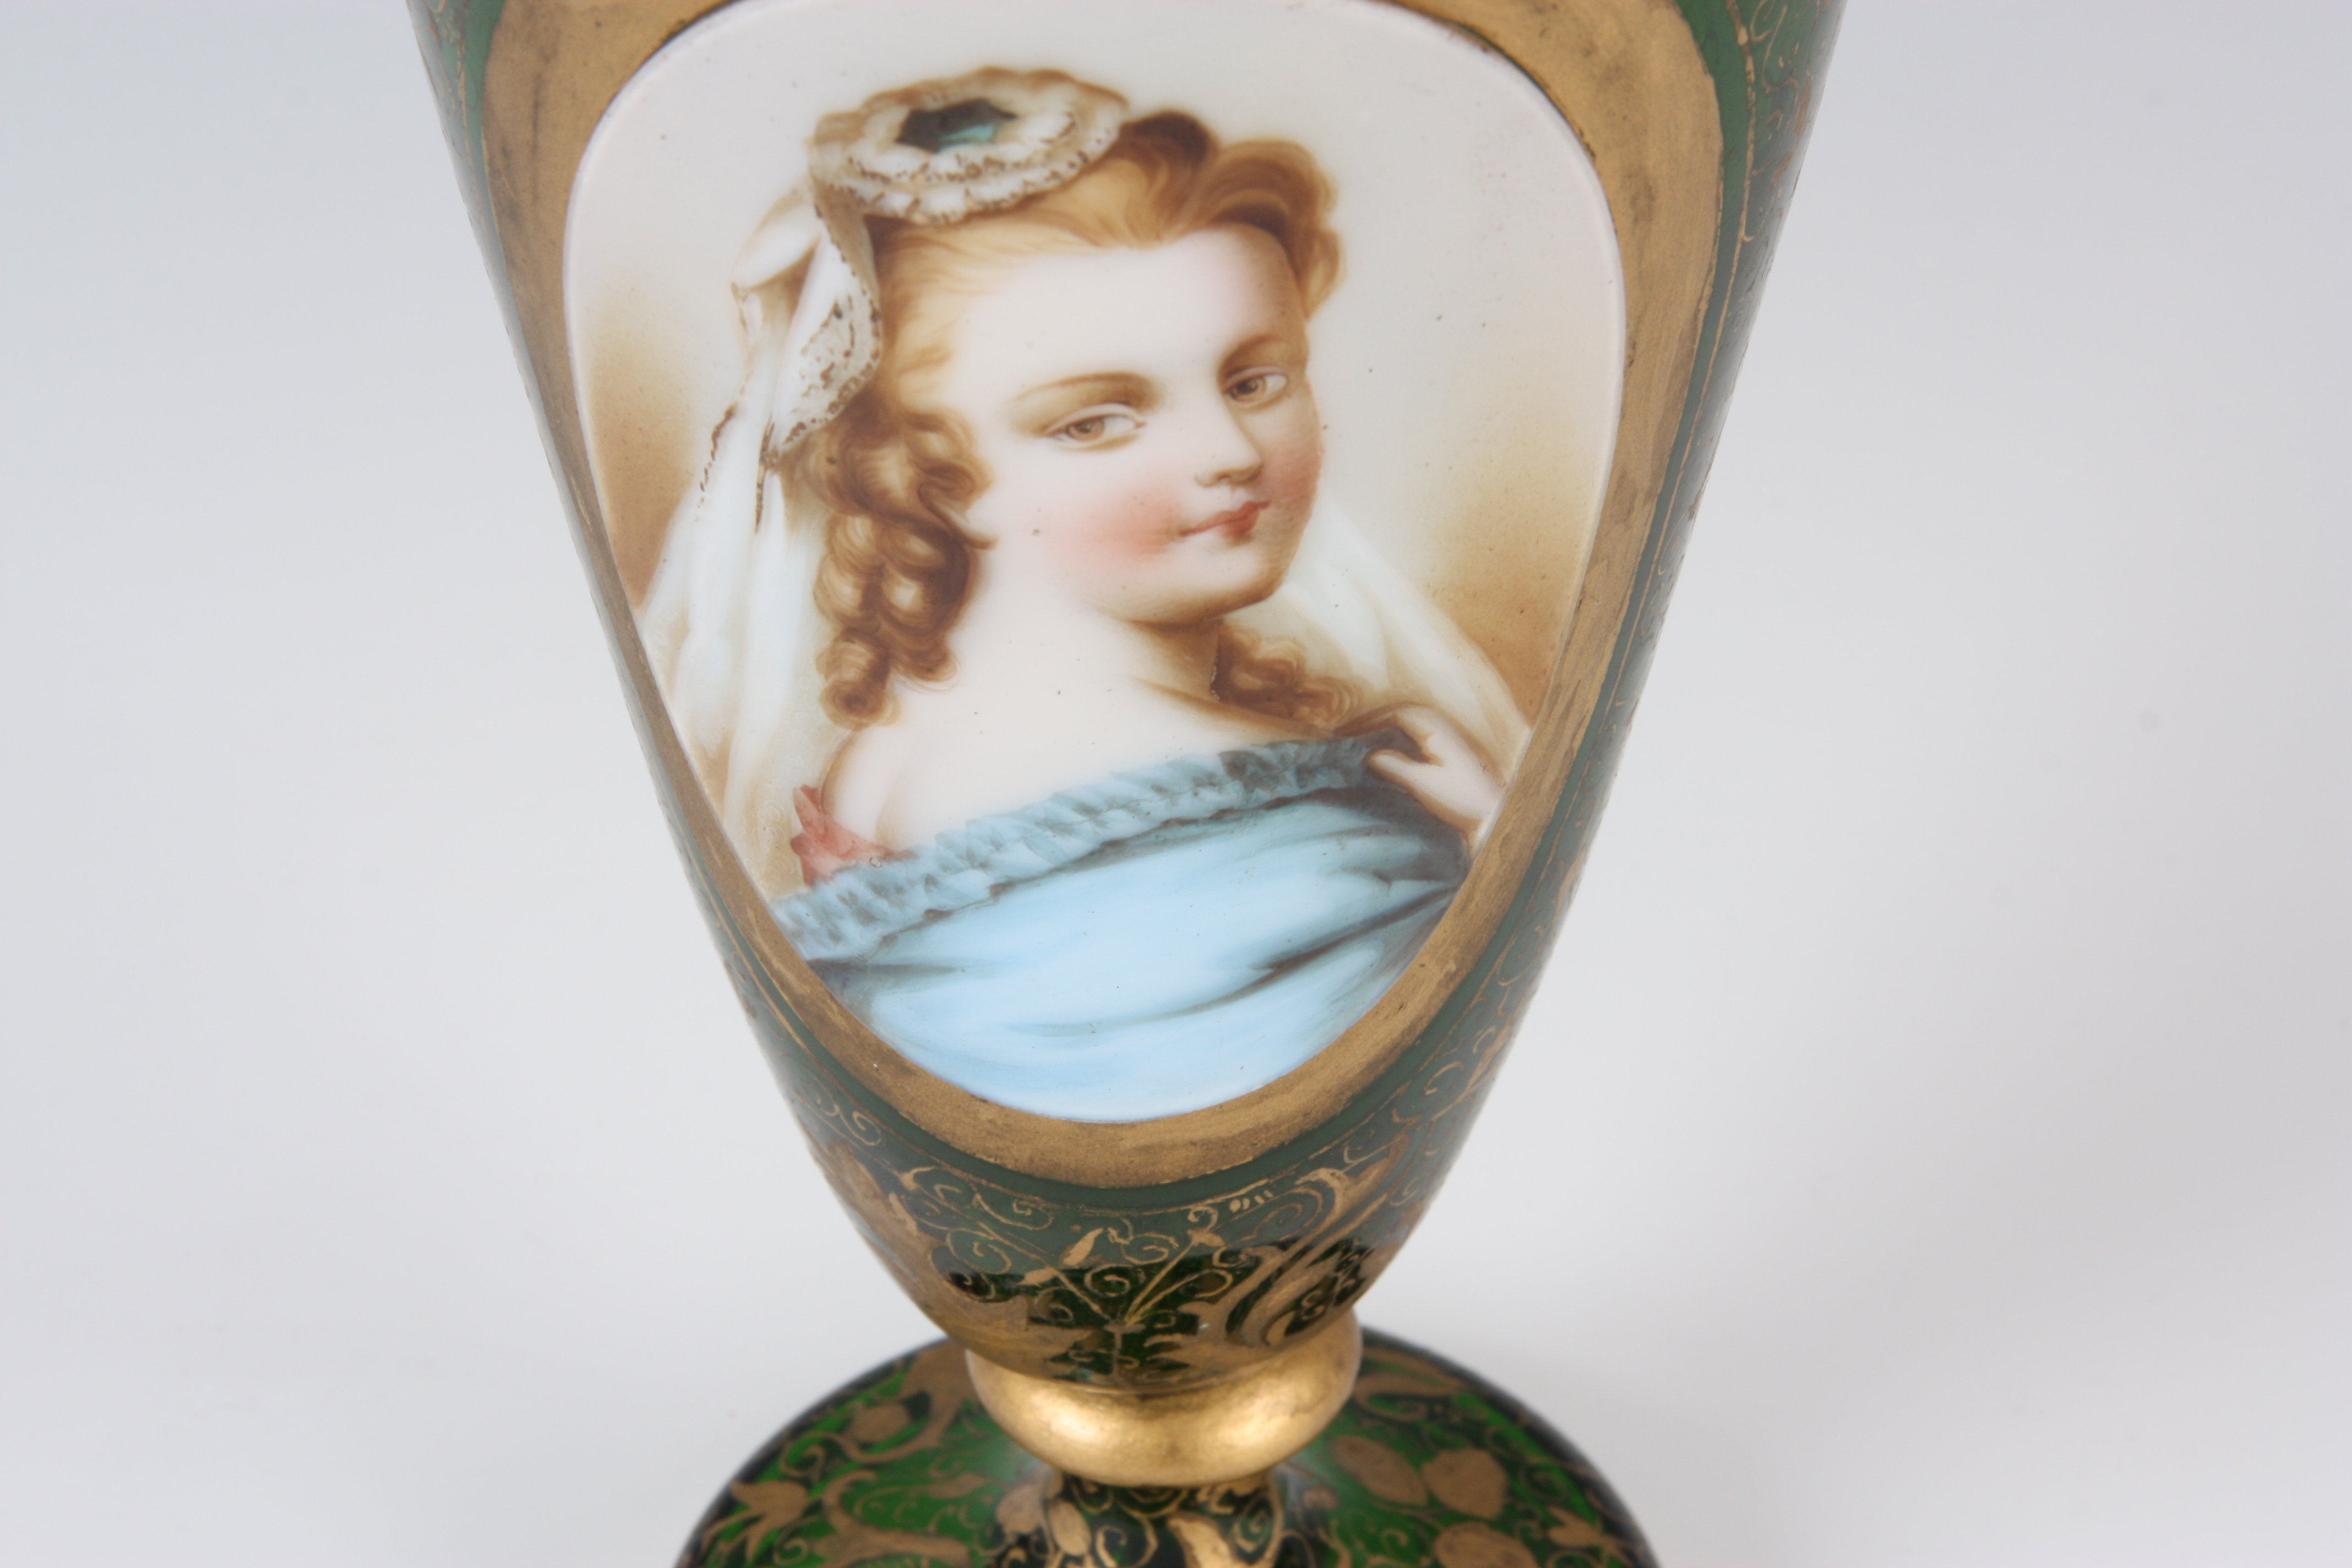 A 19TH CENTURY BOHEMIAN FLORAL GILT GREEN GLASS SLENDER VASE with a hand-painted portrait of a young - Image 4 of 6